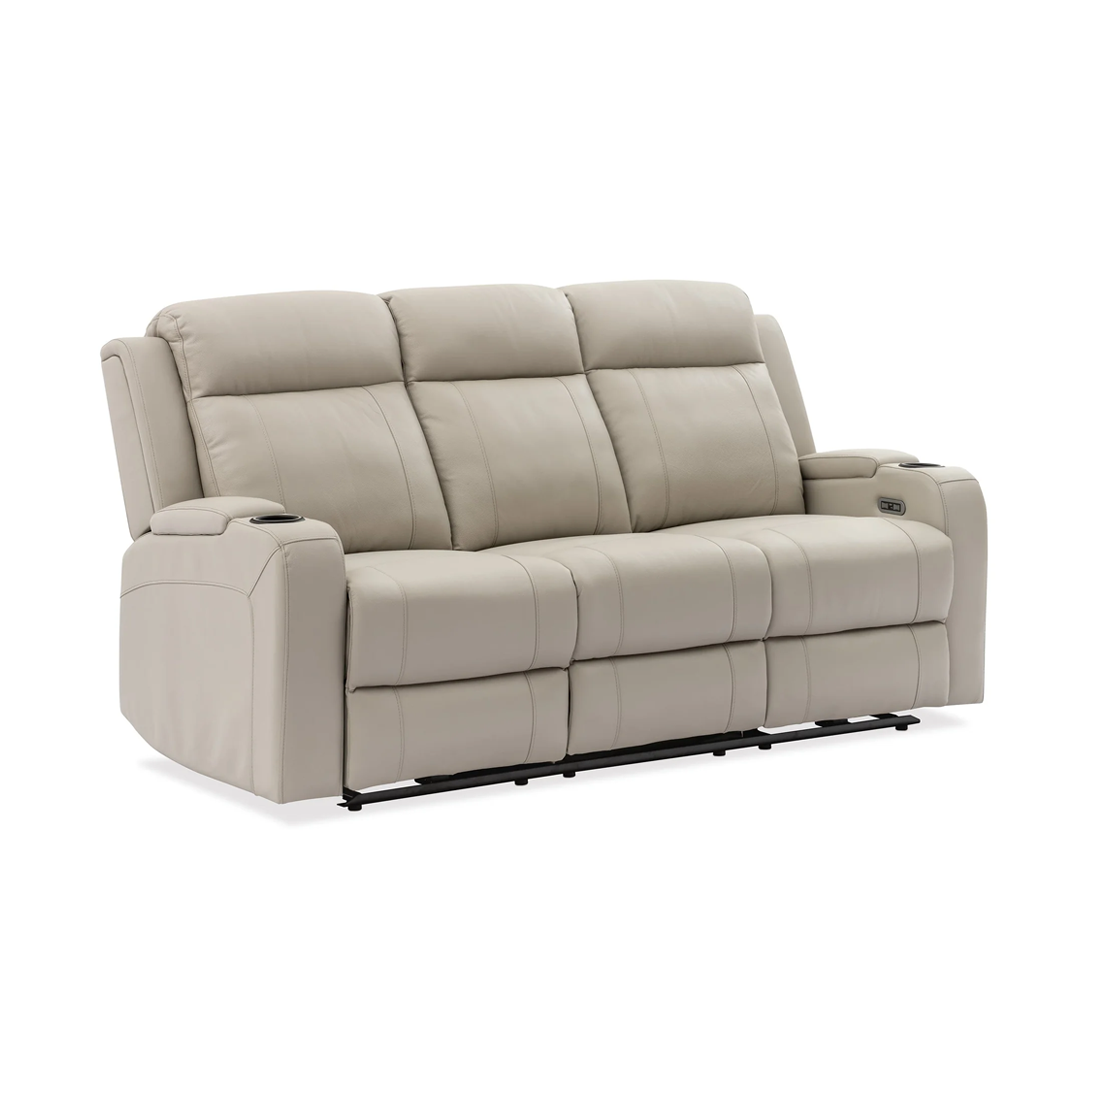 Naples Leather Electric Recliner